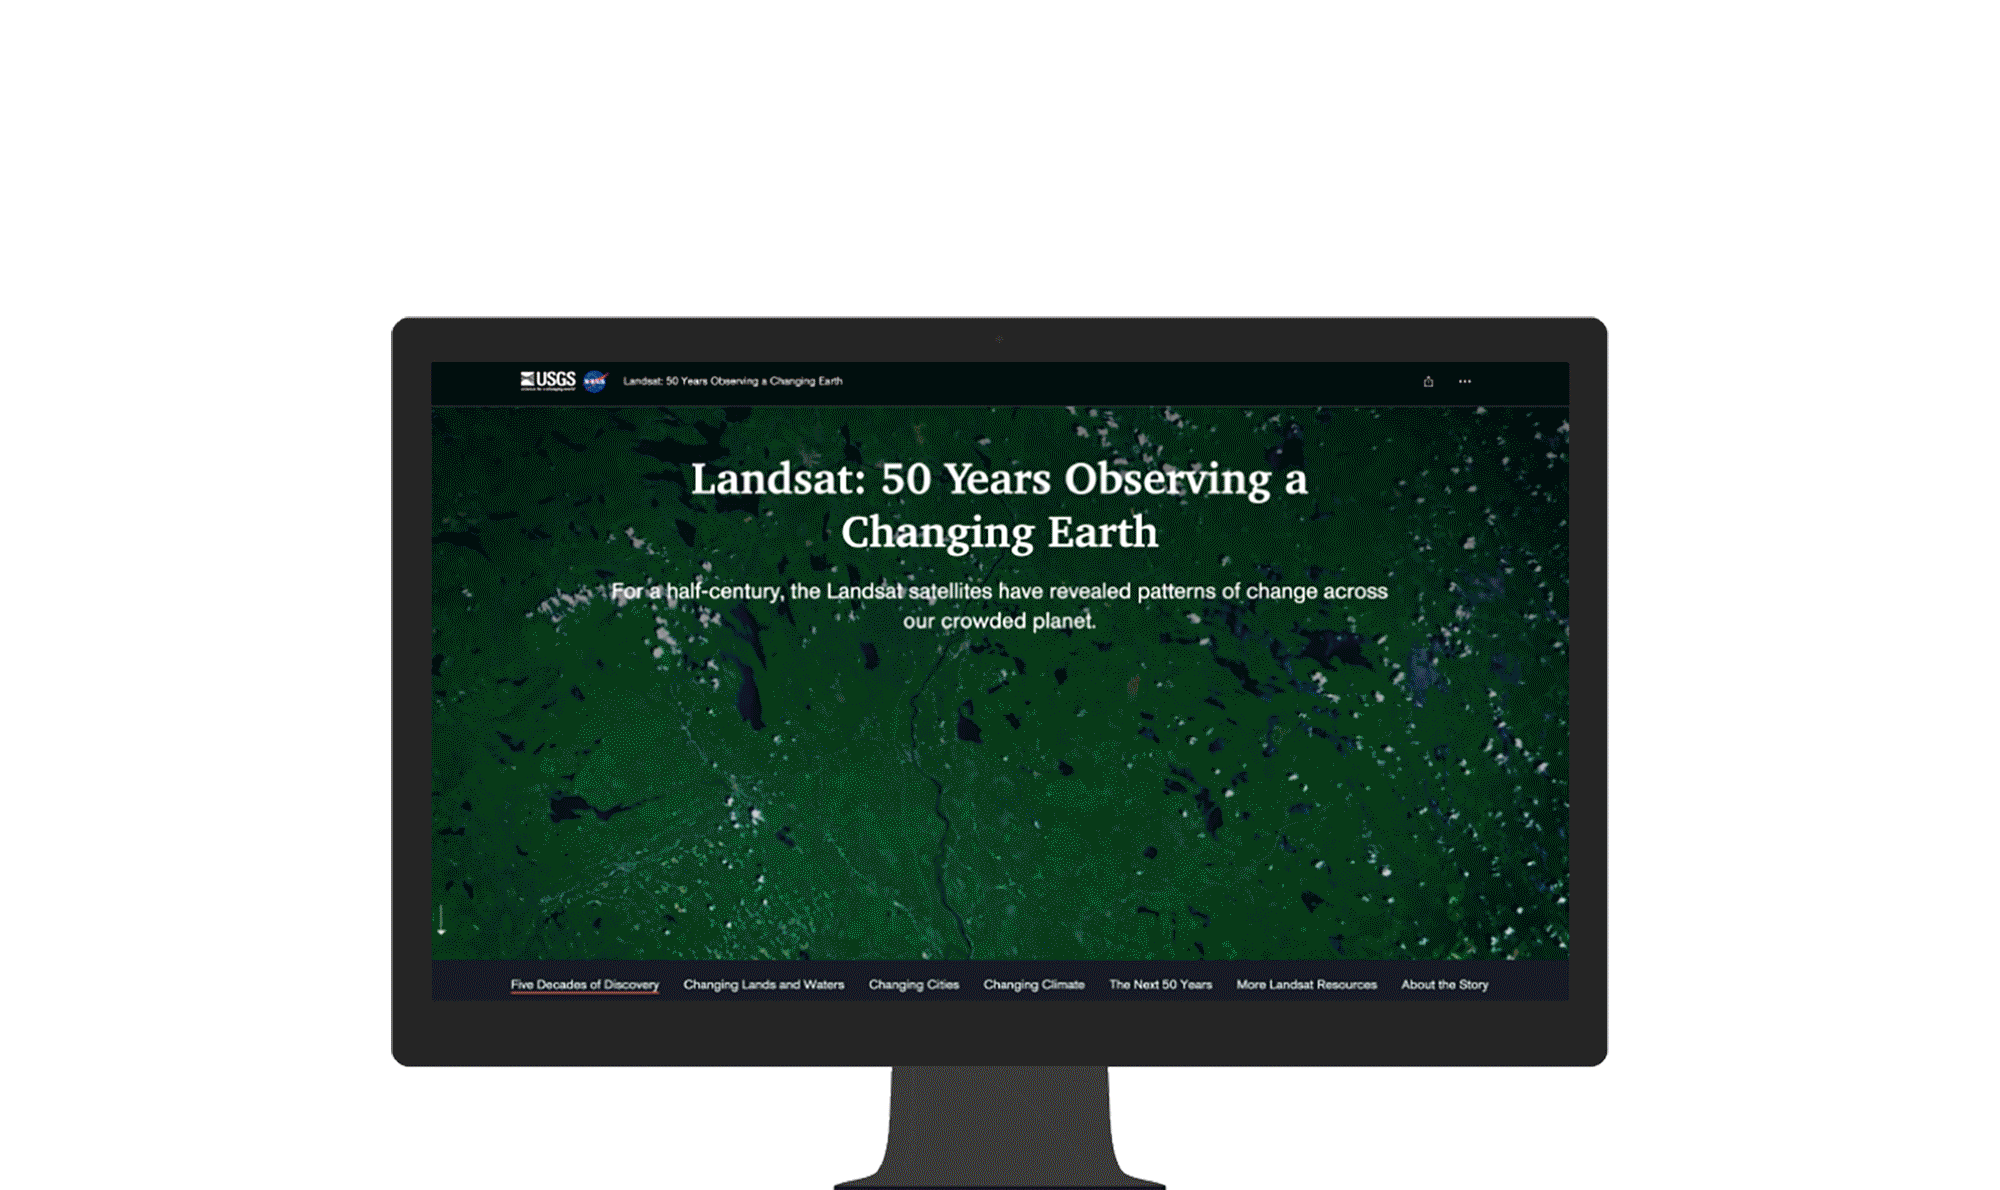 A computer monitor displaying an article with text and aerial imagery of land captured from the Landsat satellite